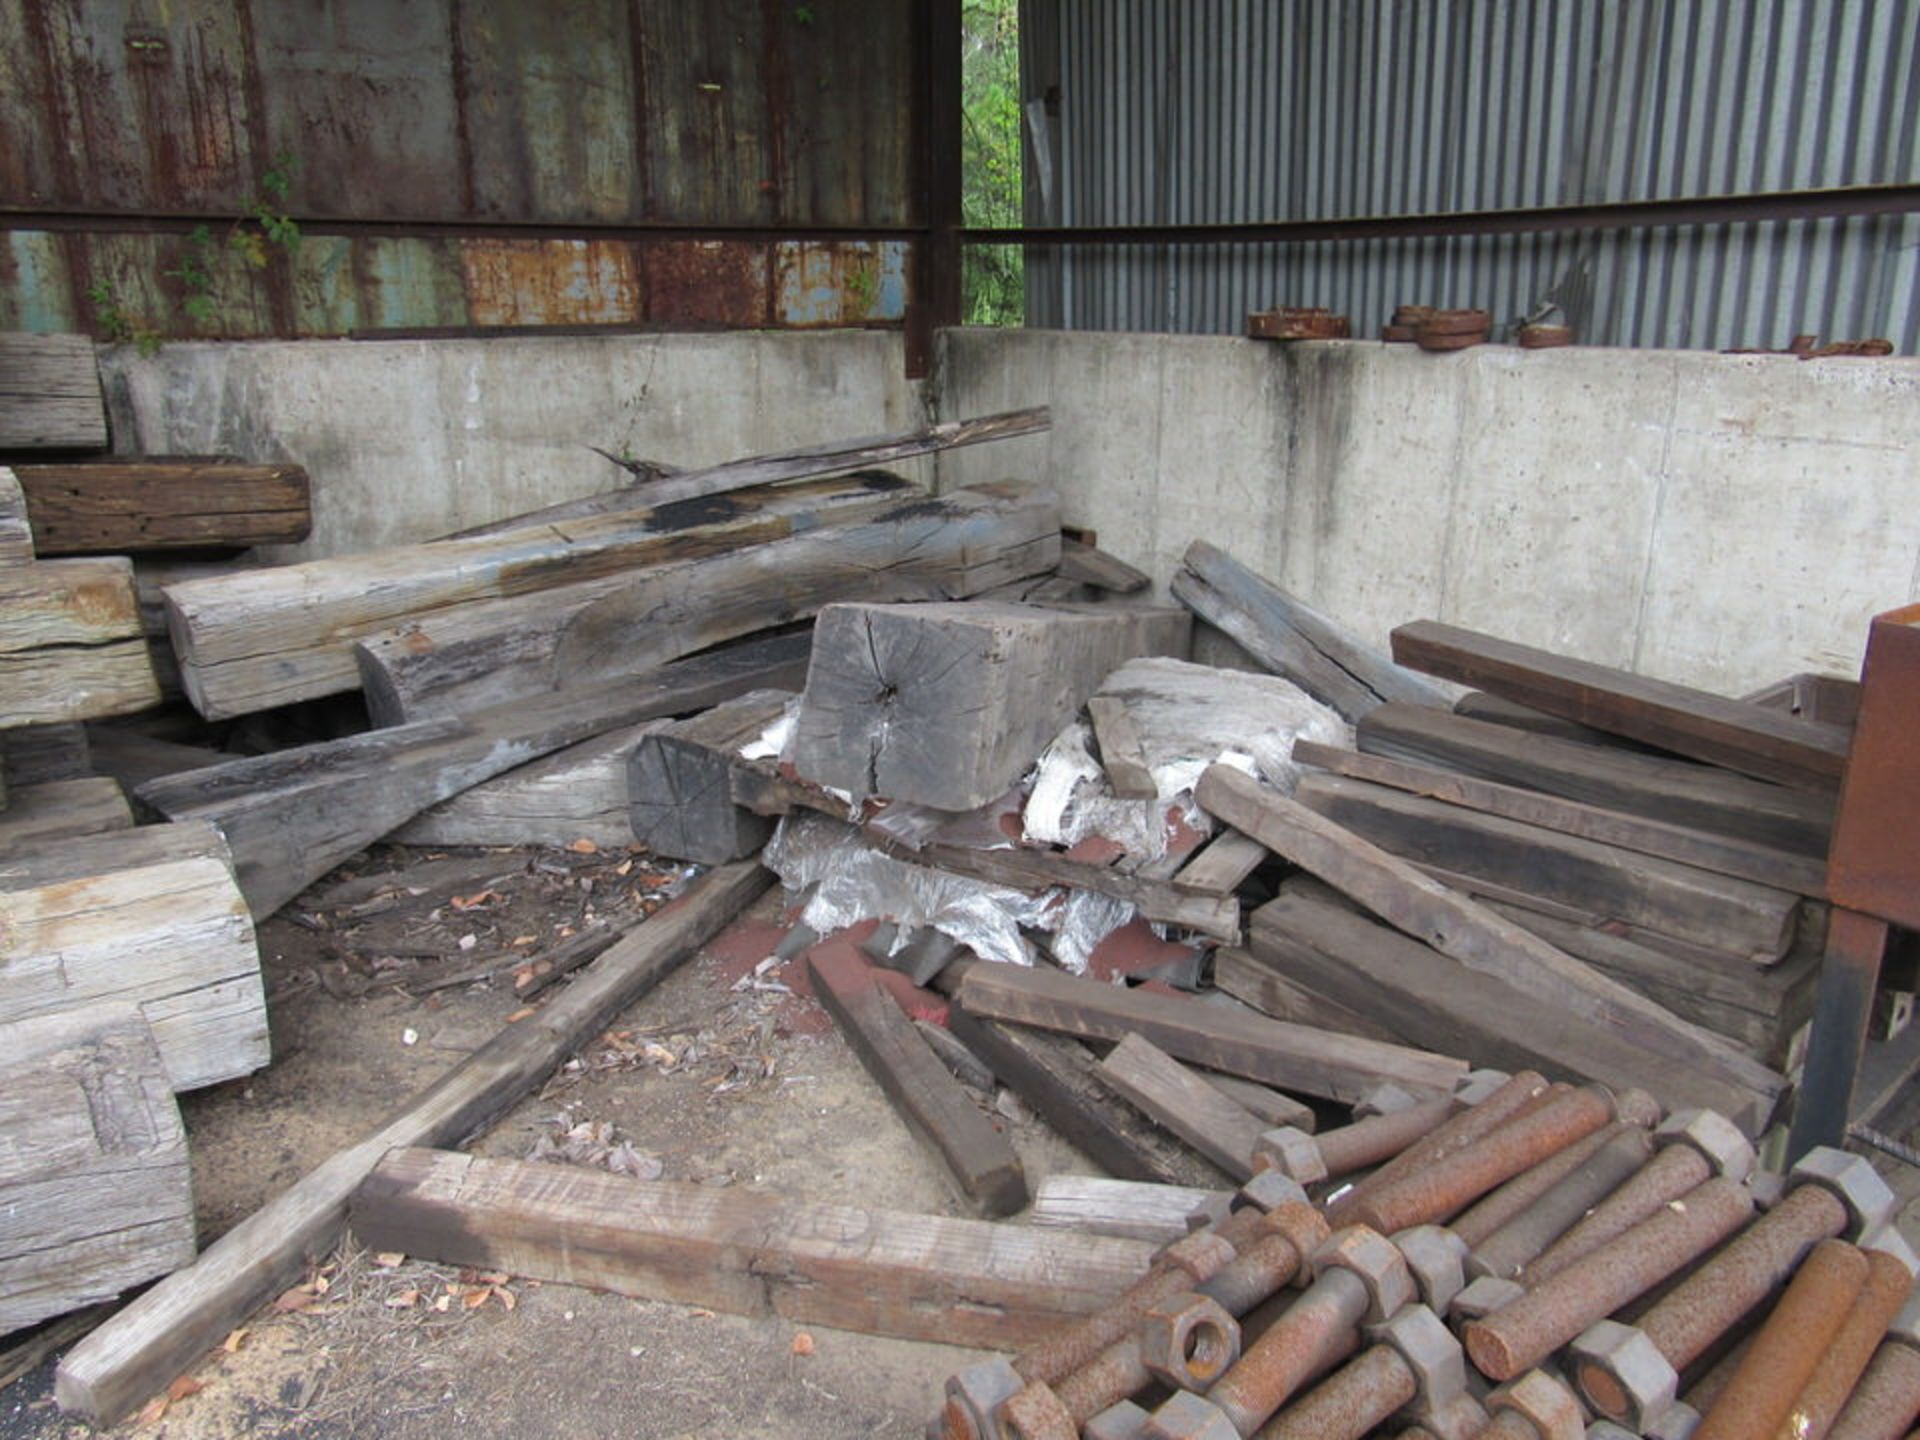 Contents of Shed - Image 7 of 7